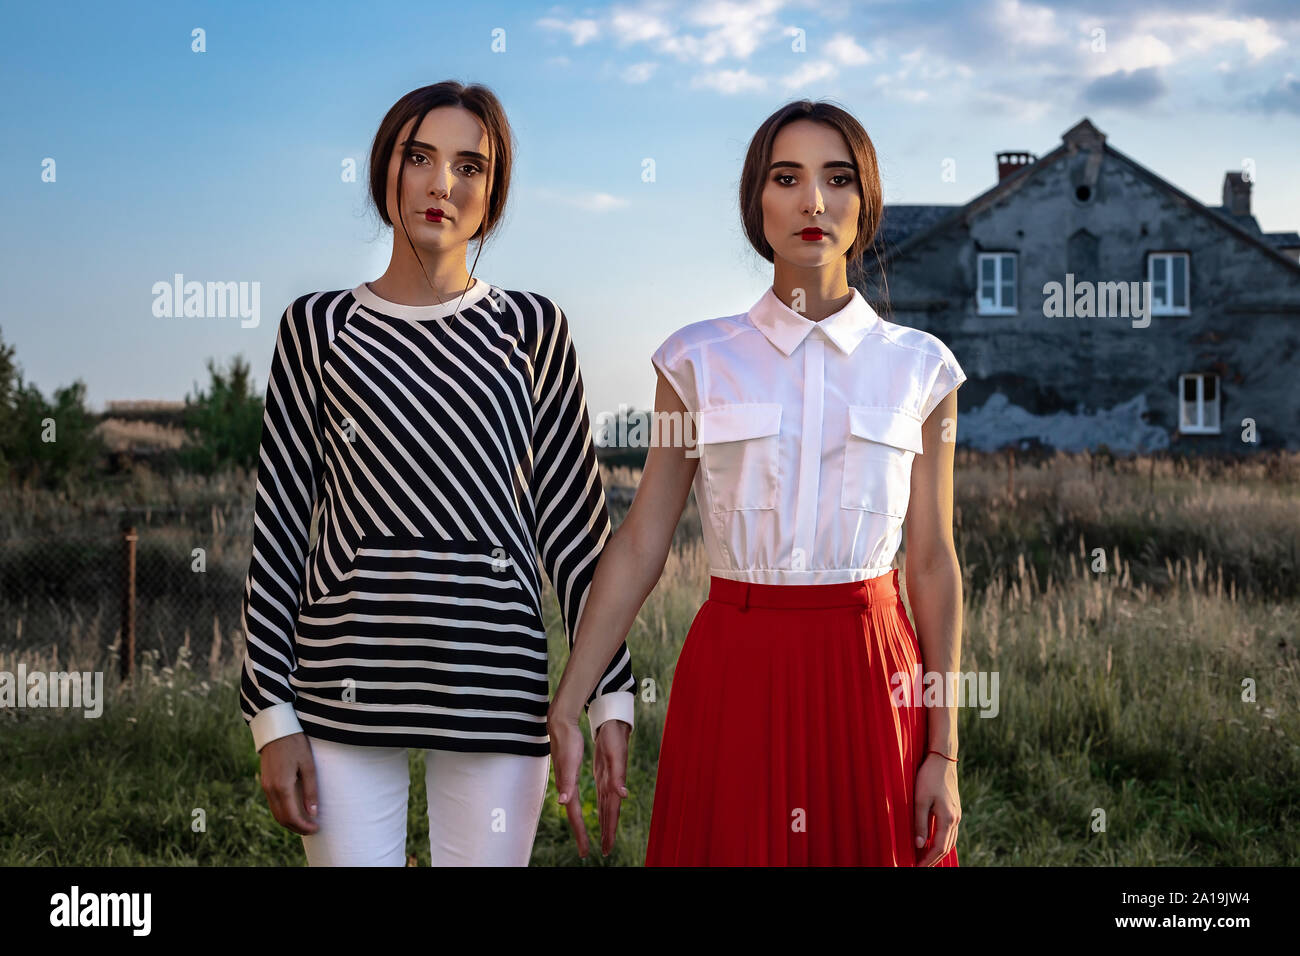 Outdoor fashion portrait of two young beautiful women wearing fashionable clothes posing on the street against the background of an old abandoned buil Stock Photo